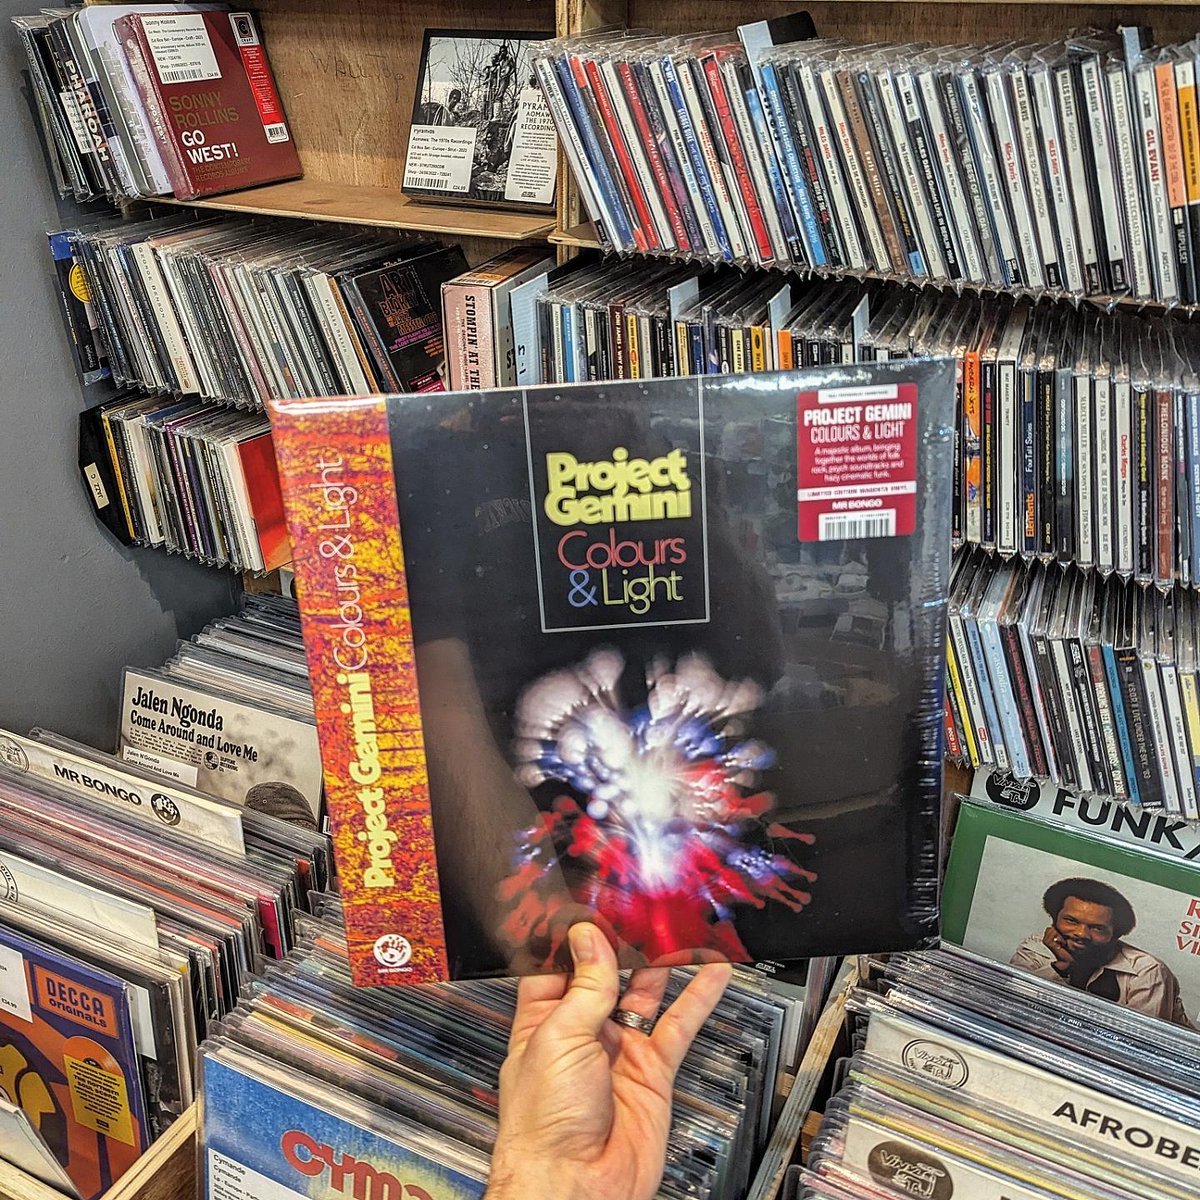 BIG BIG BIG new release week! The greatest band in the world @khruangbin are back! Plus; @theblackkeys Jane Weaver Project Gemini These and more, mean there's plenty to get your ears around this weekend! Shop open 9 - 5.30 . . . . #NewMusicFriday #VinylTap #Huddersfield